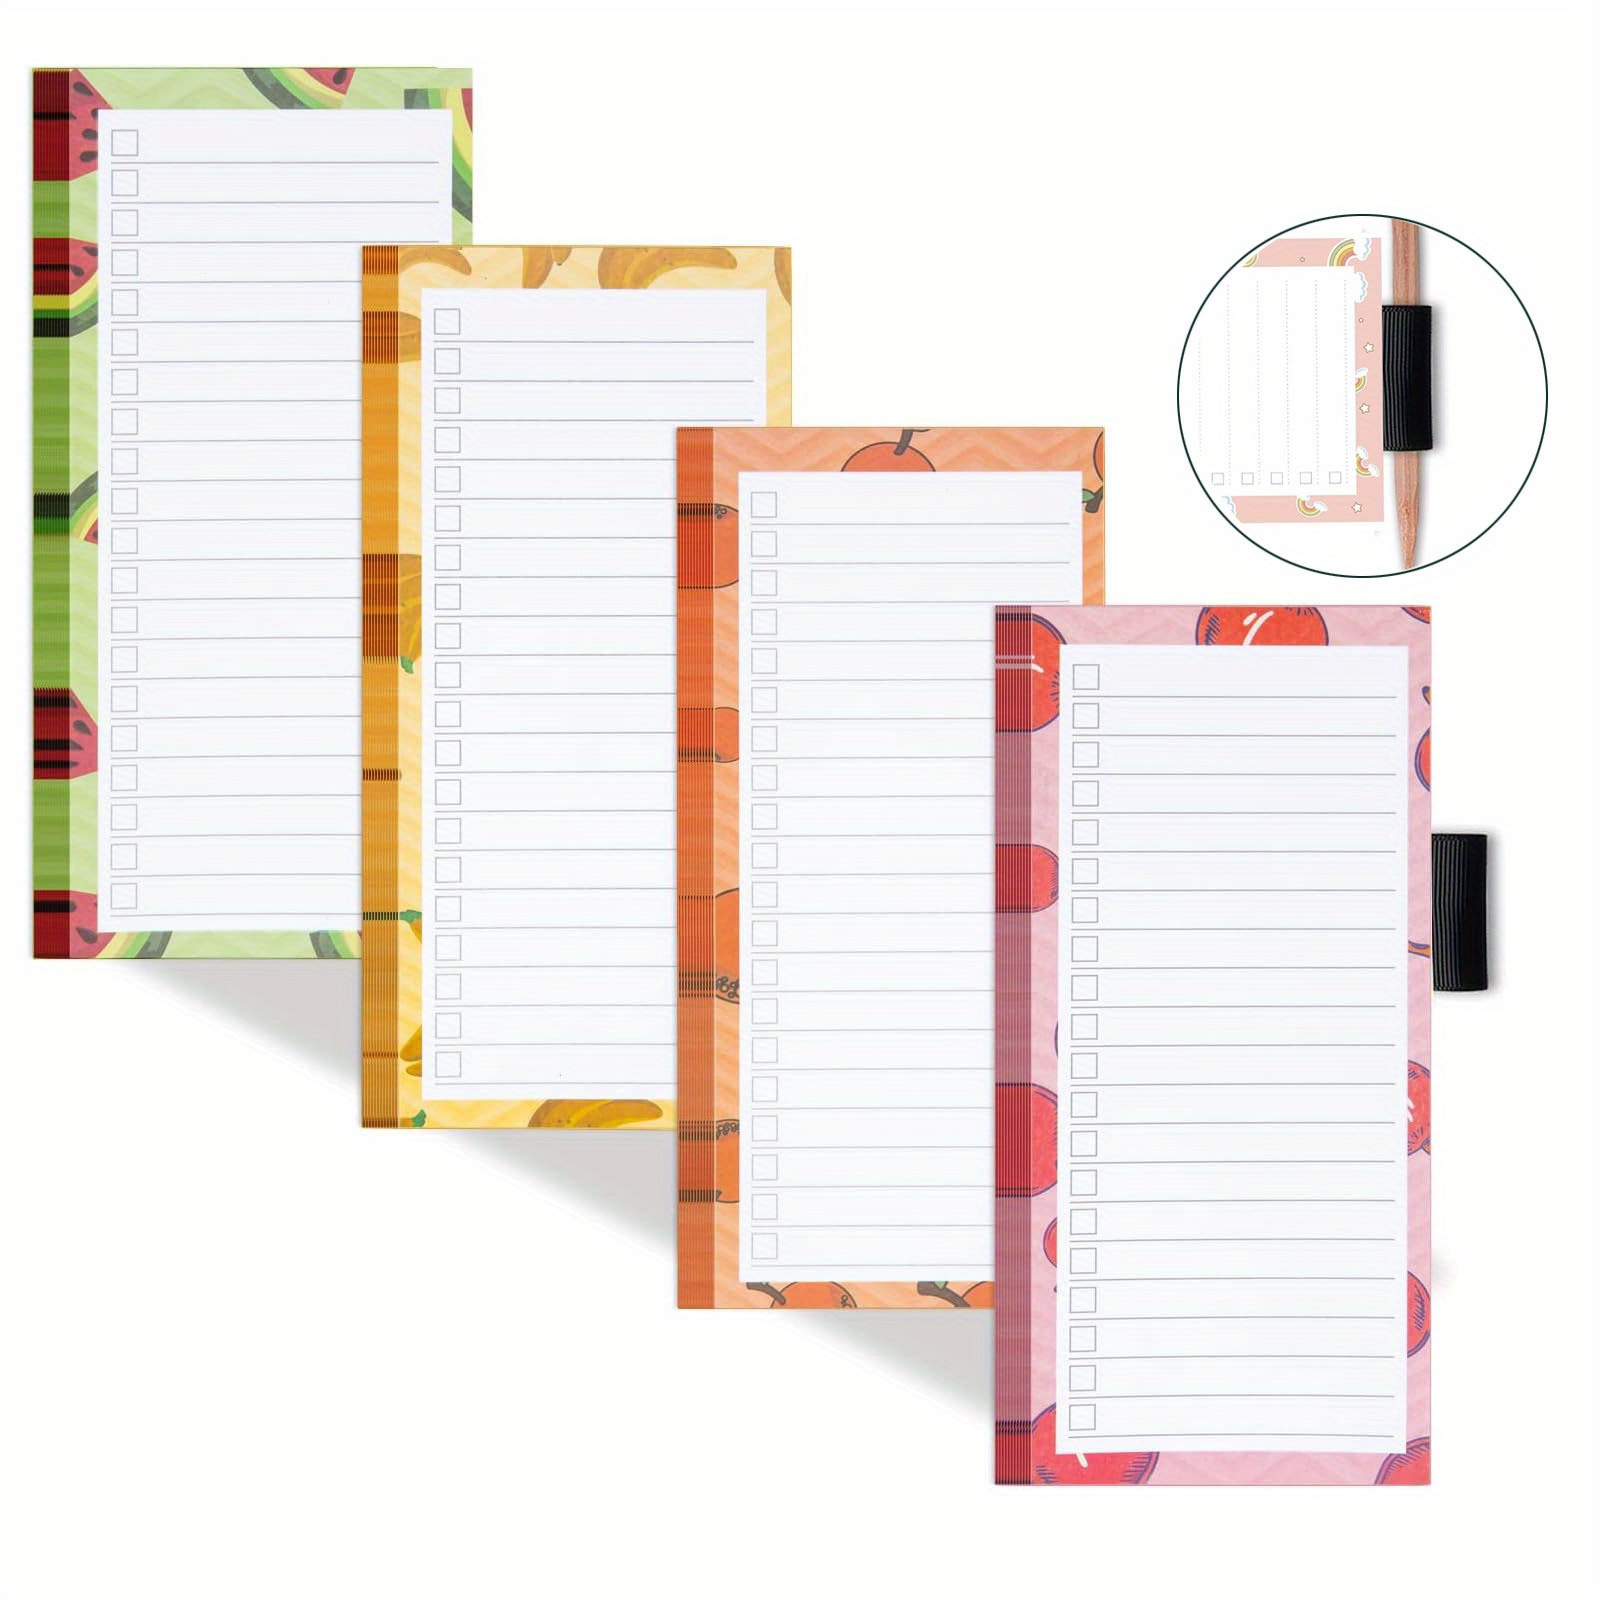 

4-piece Magnetic Fridge Notepads With Pen Holder - 50 Pages Each, Ideal For Grocery Lists & To-dos